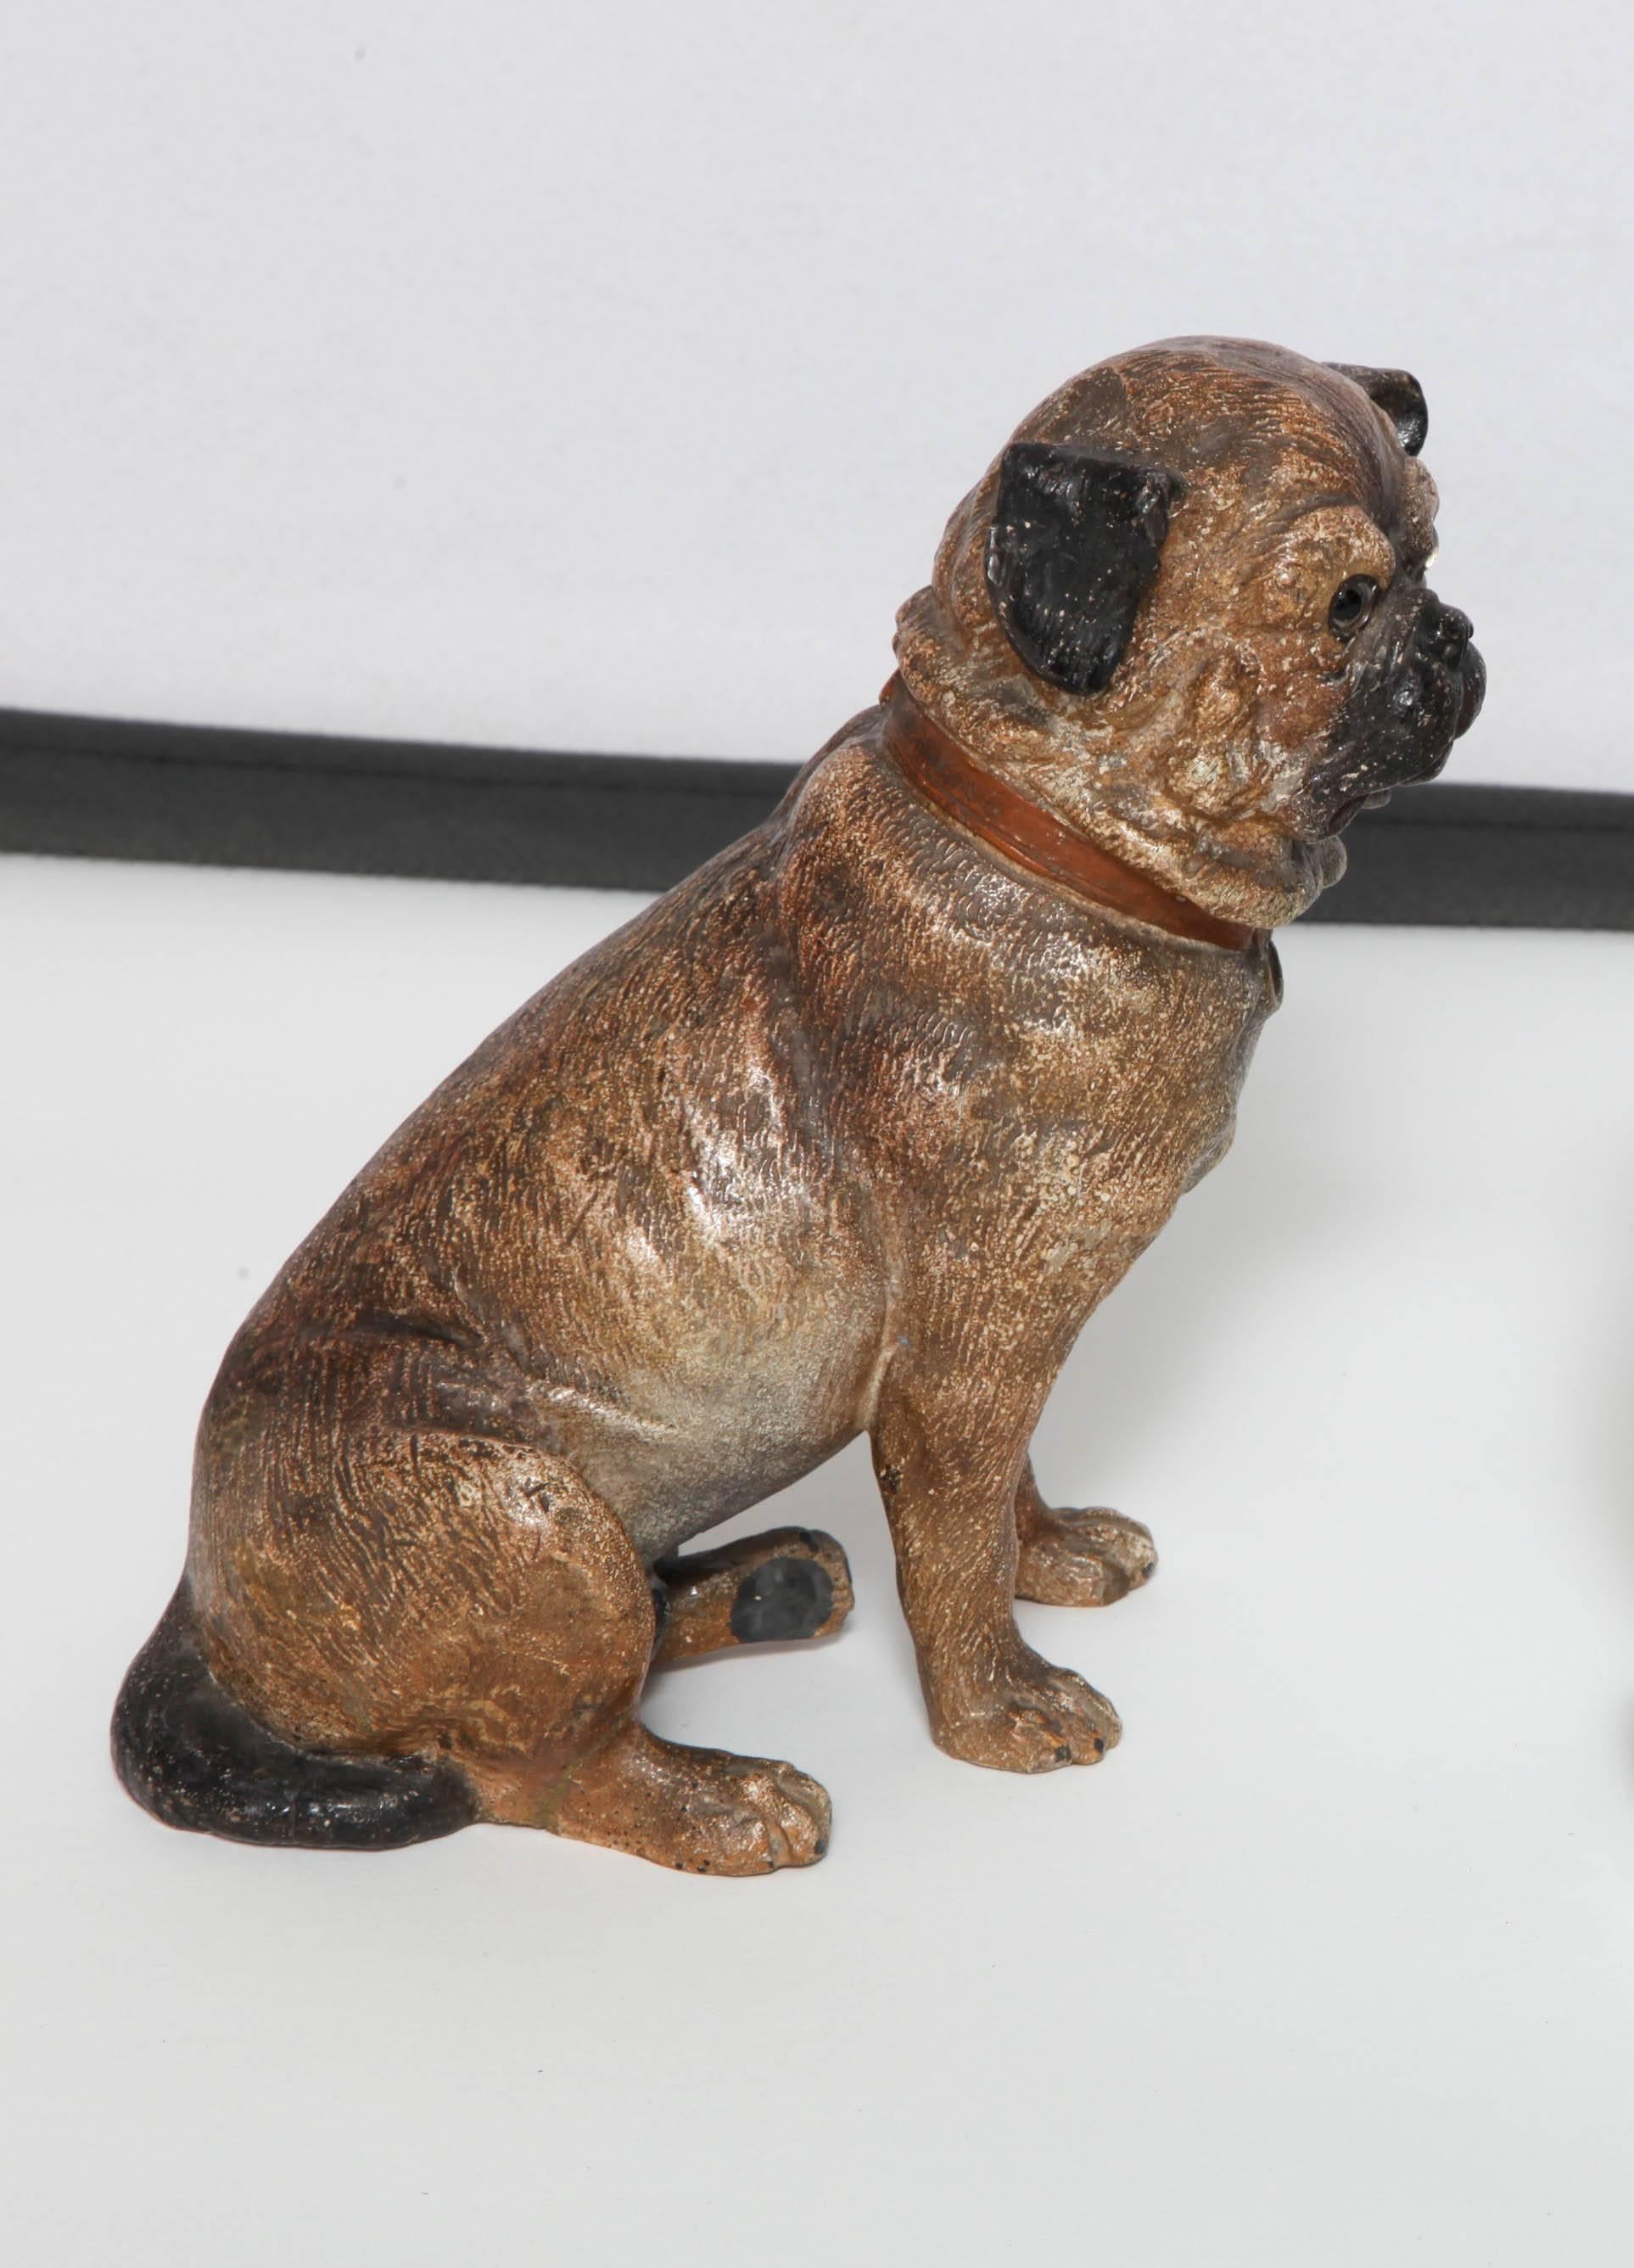 Queen Victoria fashionably created a craze for all things dogs, especially her favorite, the Spaniel which reached its apex with the Staffordshire Mantle Dogs while pushing new British manufacturing excellence in the Staffordshire Potteries of